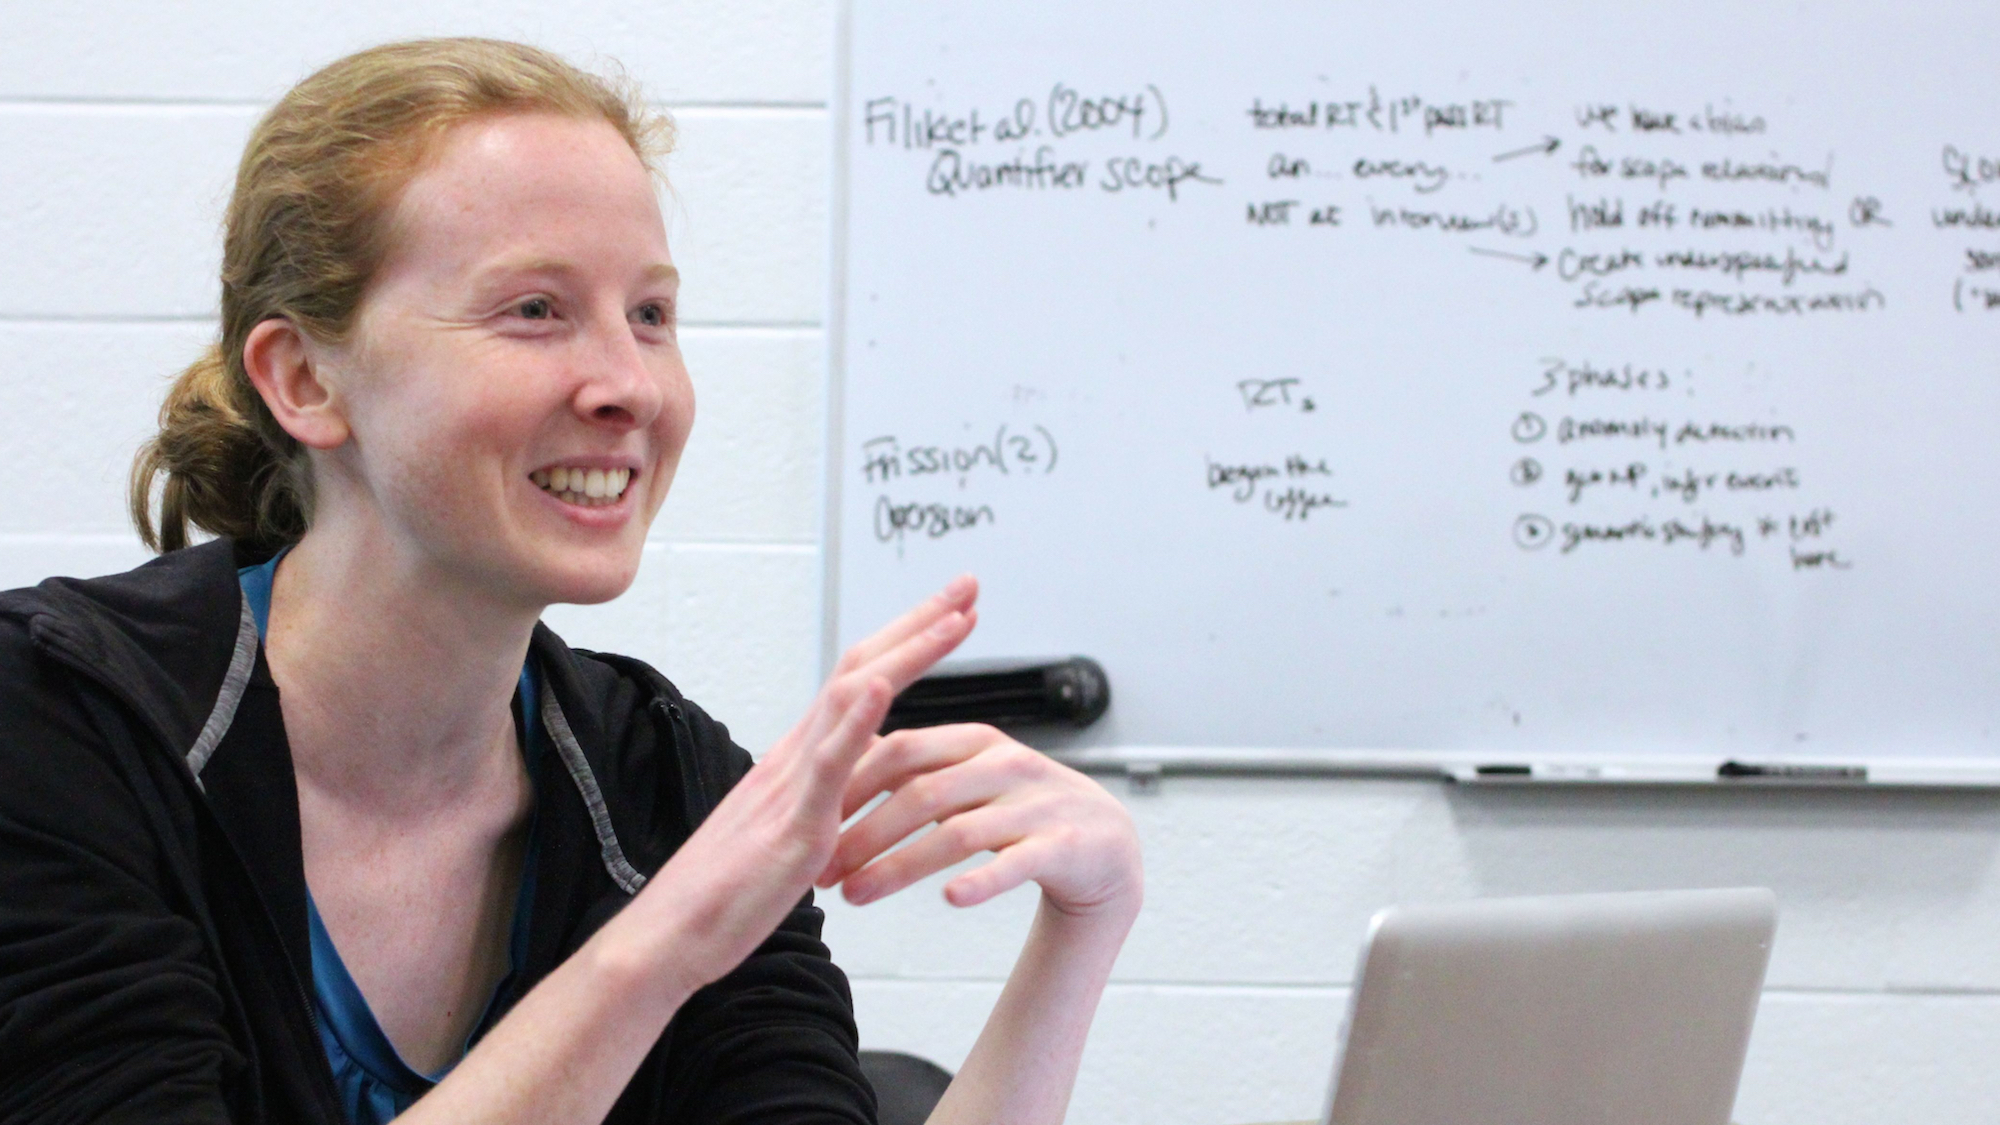 PhD student Allyson Ettinger, sitting at a conference table in three-quarter profile, leading a discussion in front of a whiteboard covered in notes, with a gratified smile